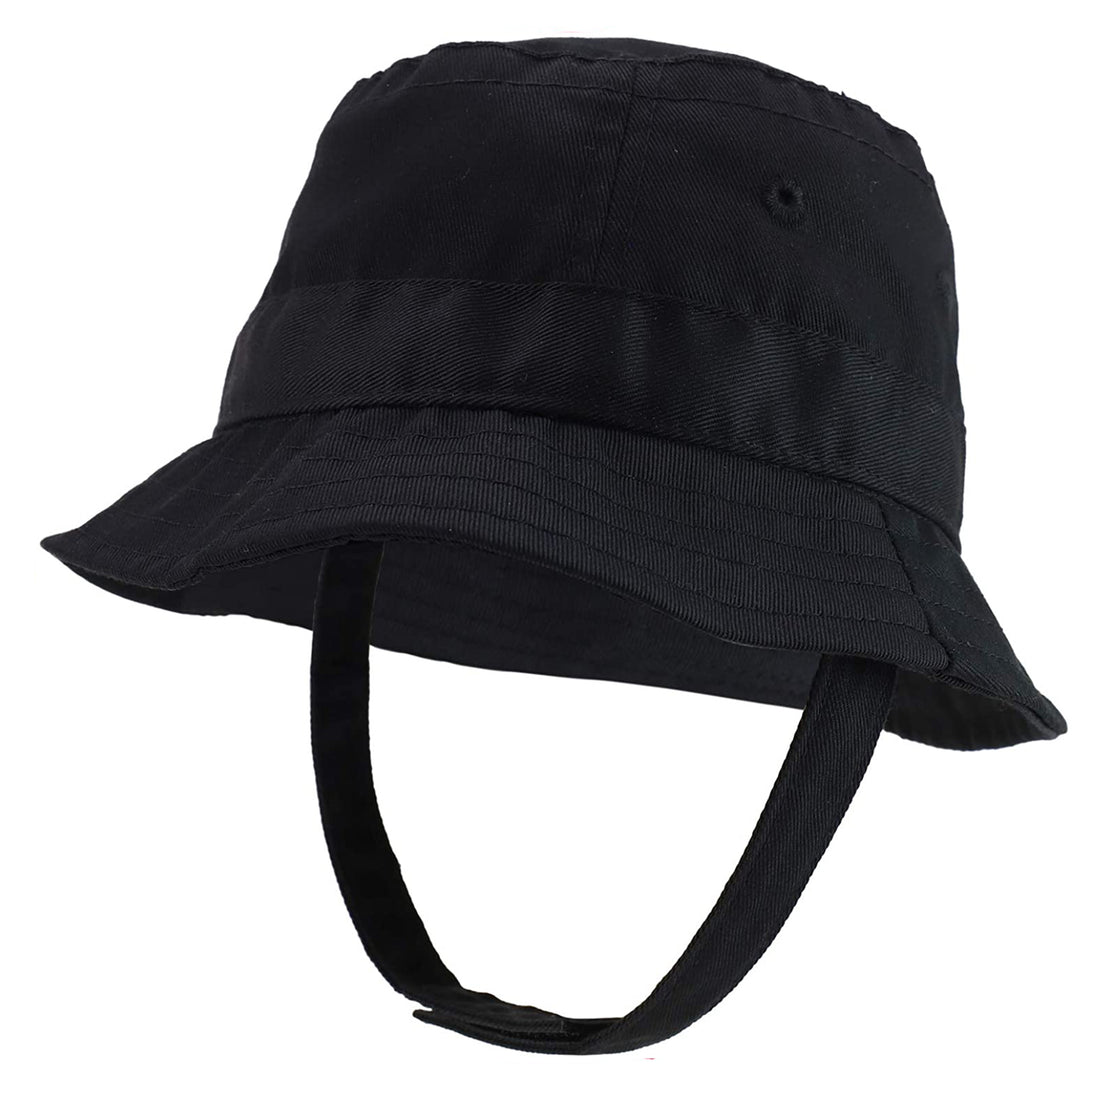 Trendy Apparel Shop Infant Light Weight Bucket Hat with Chin Strap